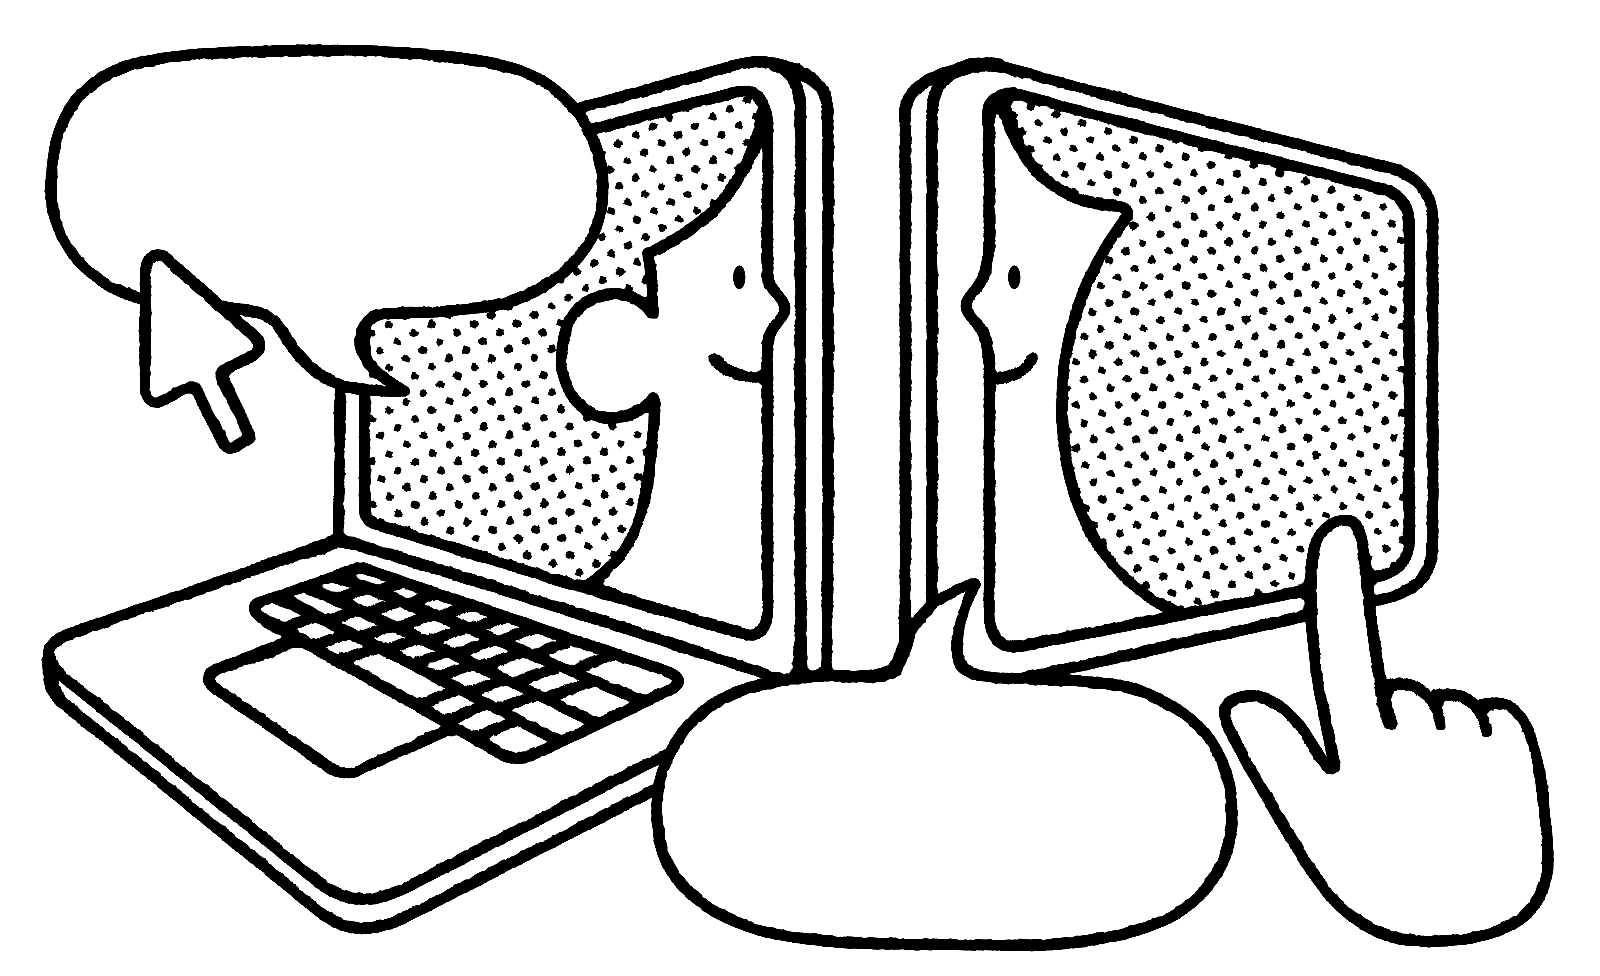 faces in laptop and tablet smiling at each other